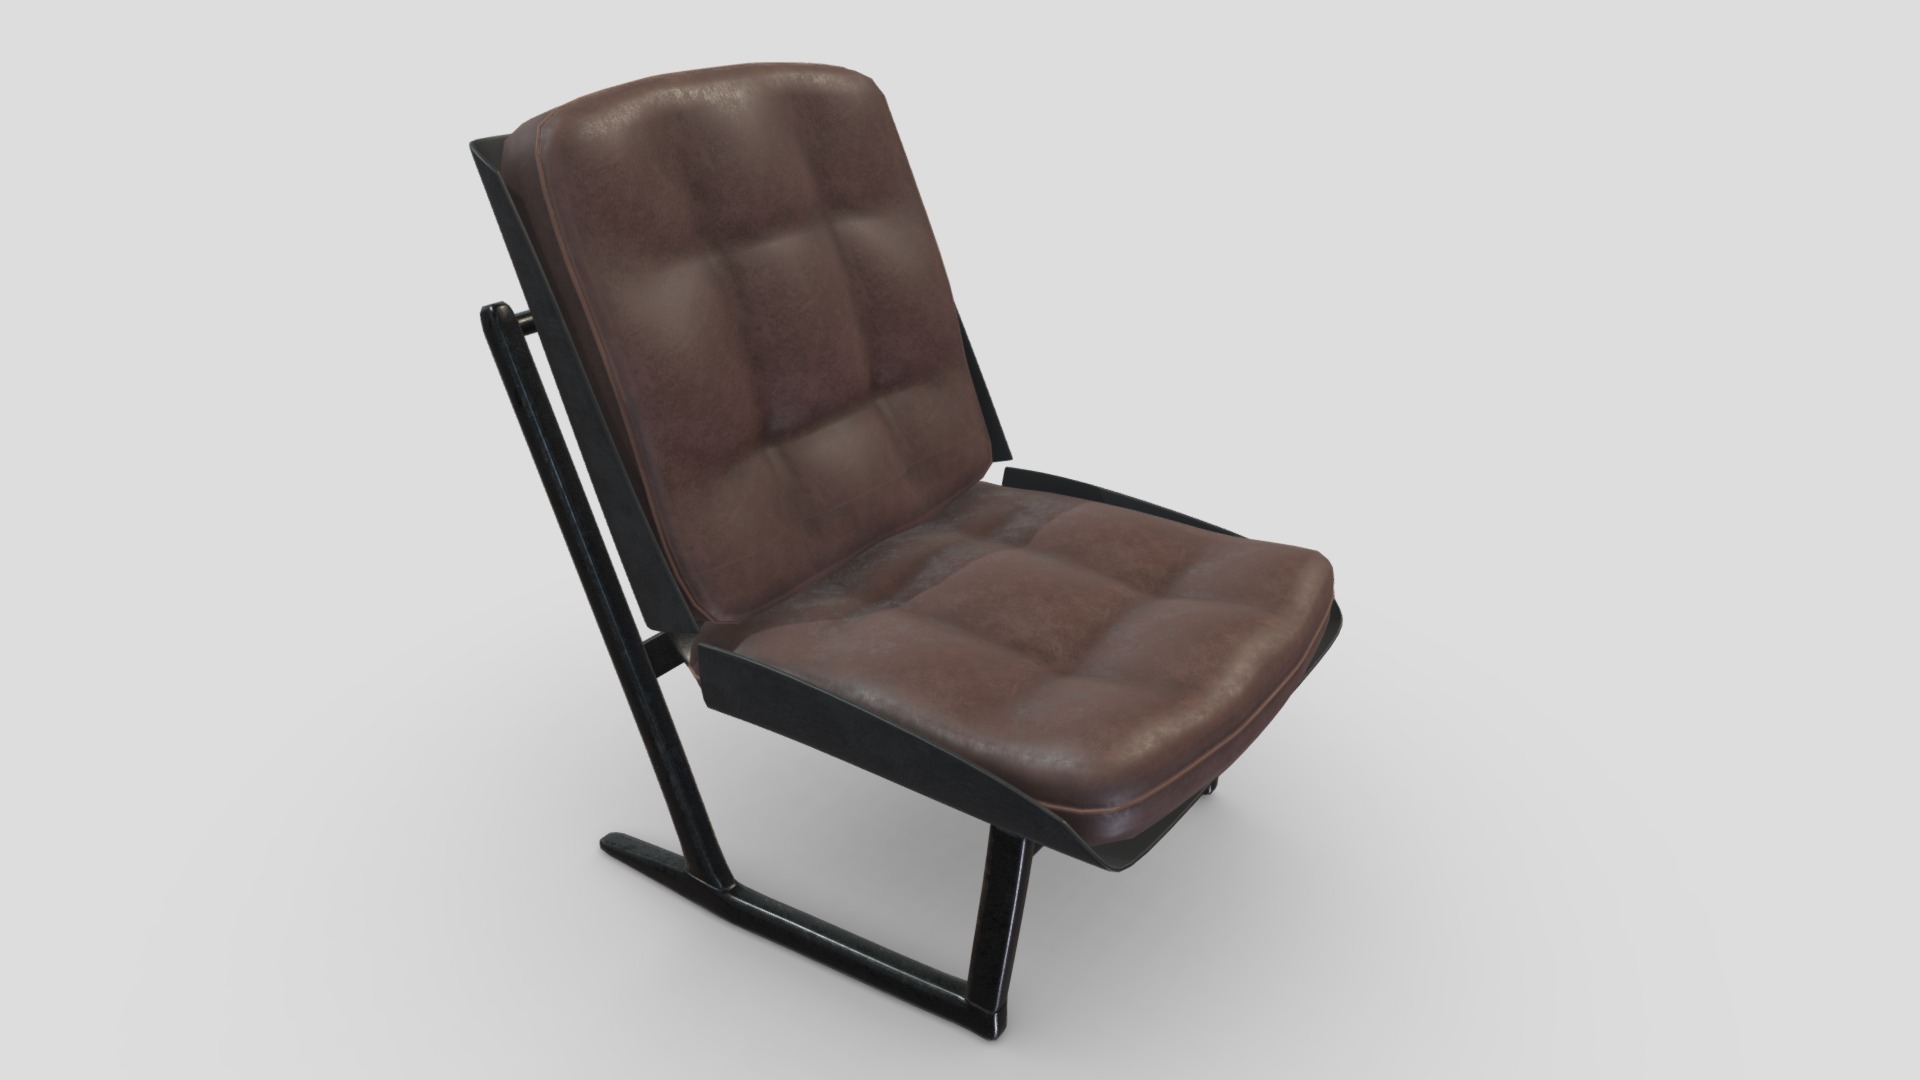 3D model Arm Chair  17 - This is a 3D model of the Arm Chair  17. The 3D model is about a leather chair with a cushion.